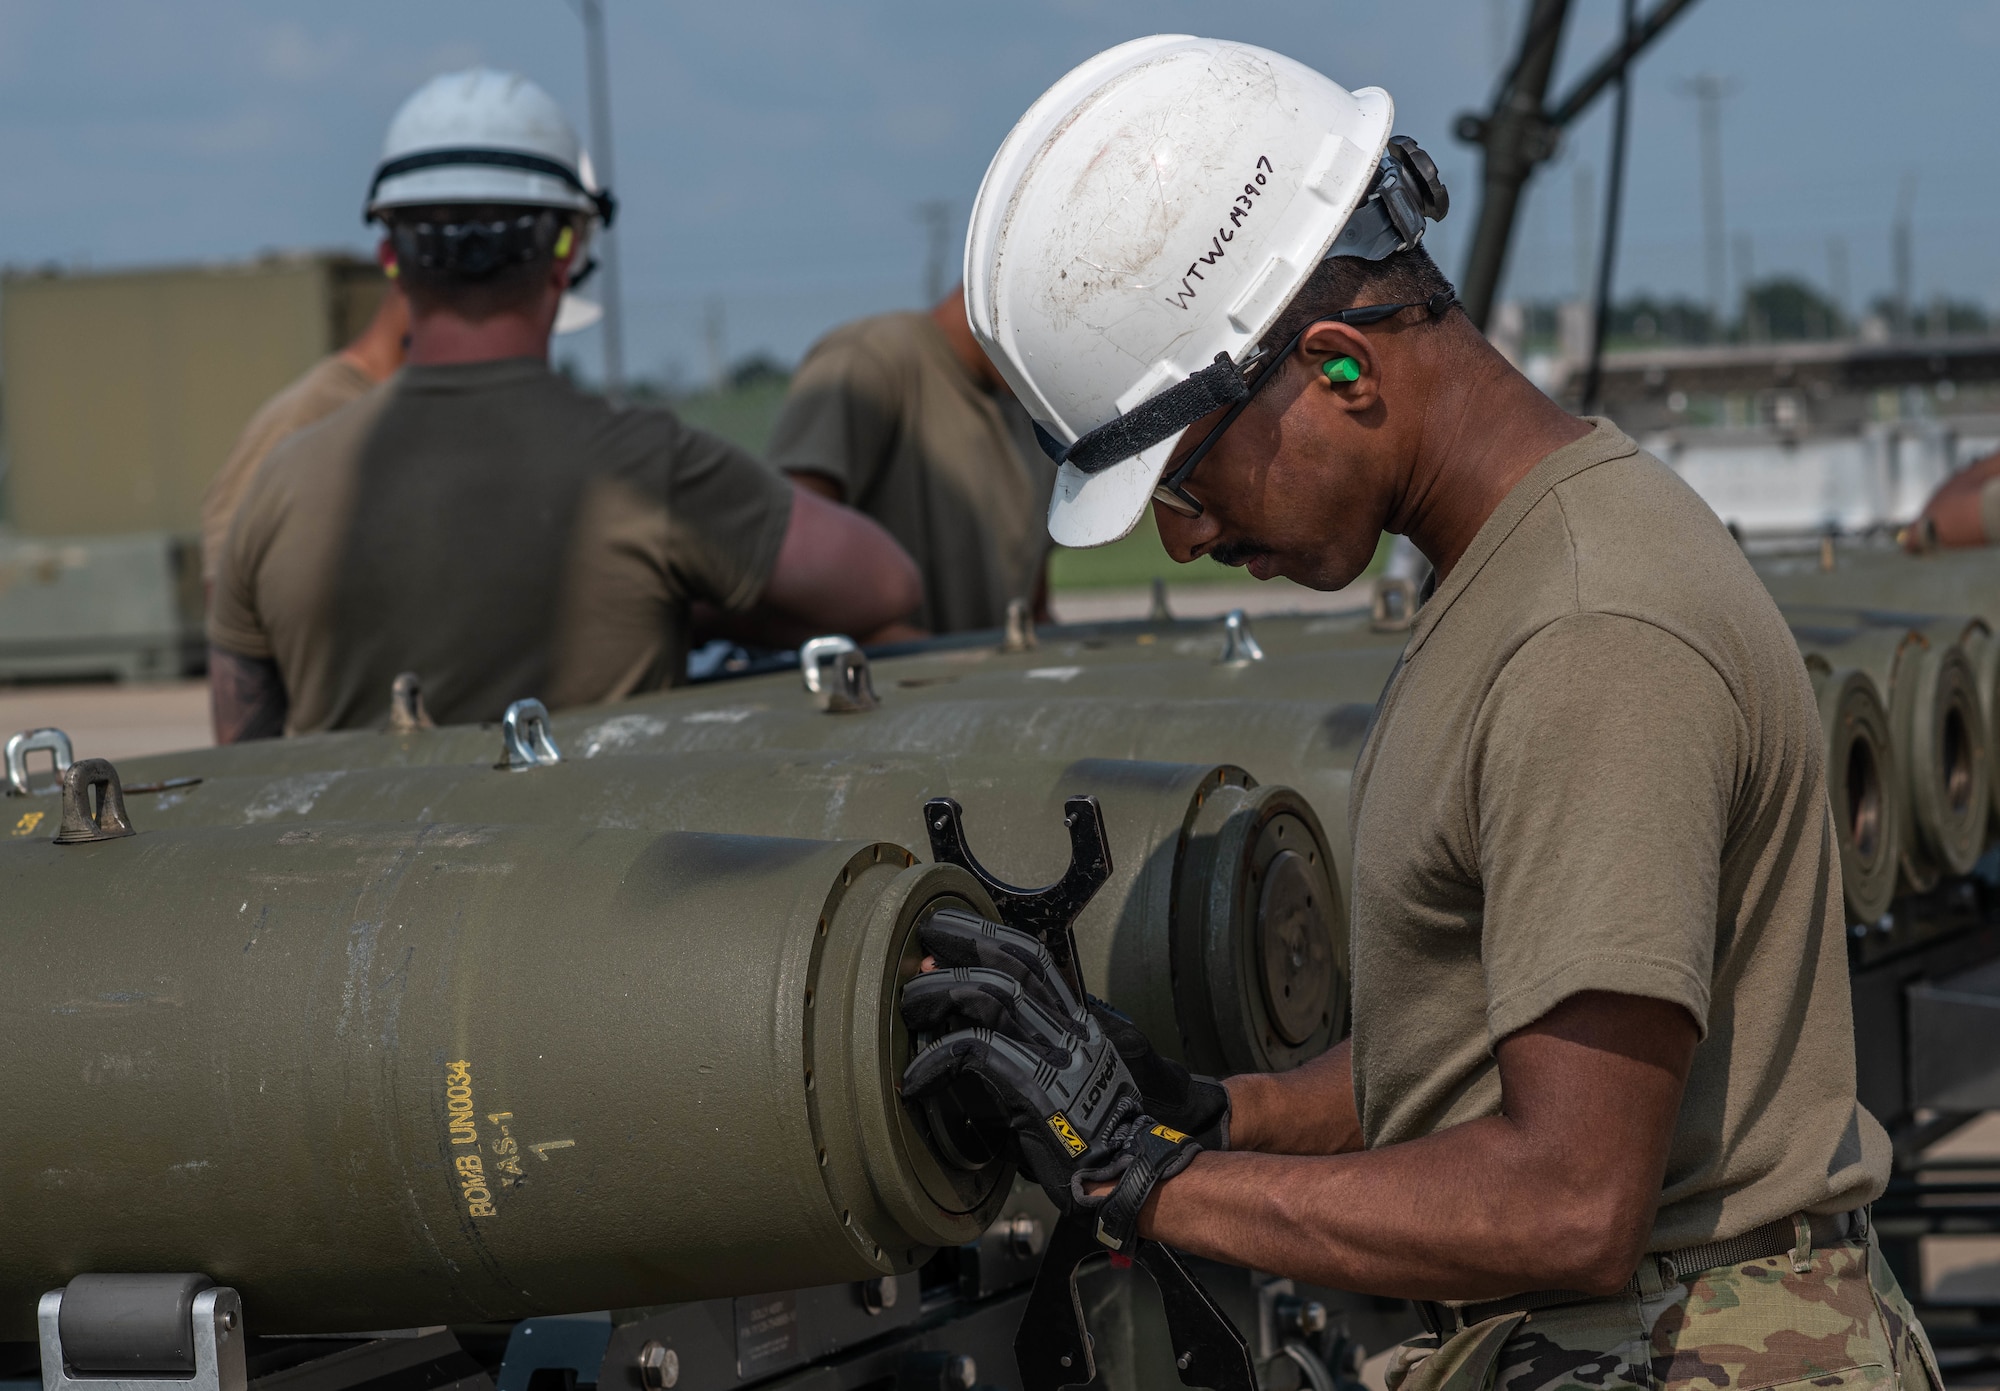 U.S. Air Force Airman 1st Class, Sooraj Thaivalappil, 509th Munitions Squadron conventional maintenance crew chief, prepares the tail end of a Guided Bomb Unit (GBU-38) assembly during exercise Quick Fuze at Whiteman Air Force Base, Missouri, July 20, 2021. Exercise Quick Fuze evaluates the squadron's ability to rapidly produce munitions. Quick Fuze is a routine exercise used to prepare contingency weapons for the B-2 Spirit and maintain operational readiness to effectively support the stealth bomber. (U.S. Air Force photo by Airman 1st Class Victoria Hommel)